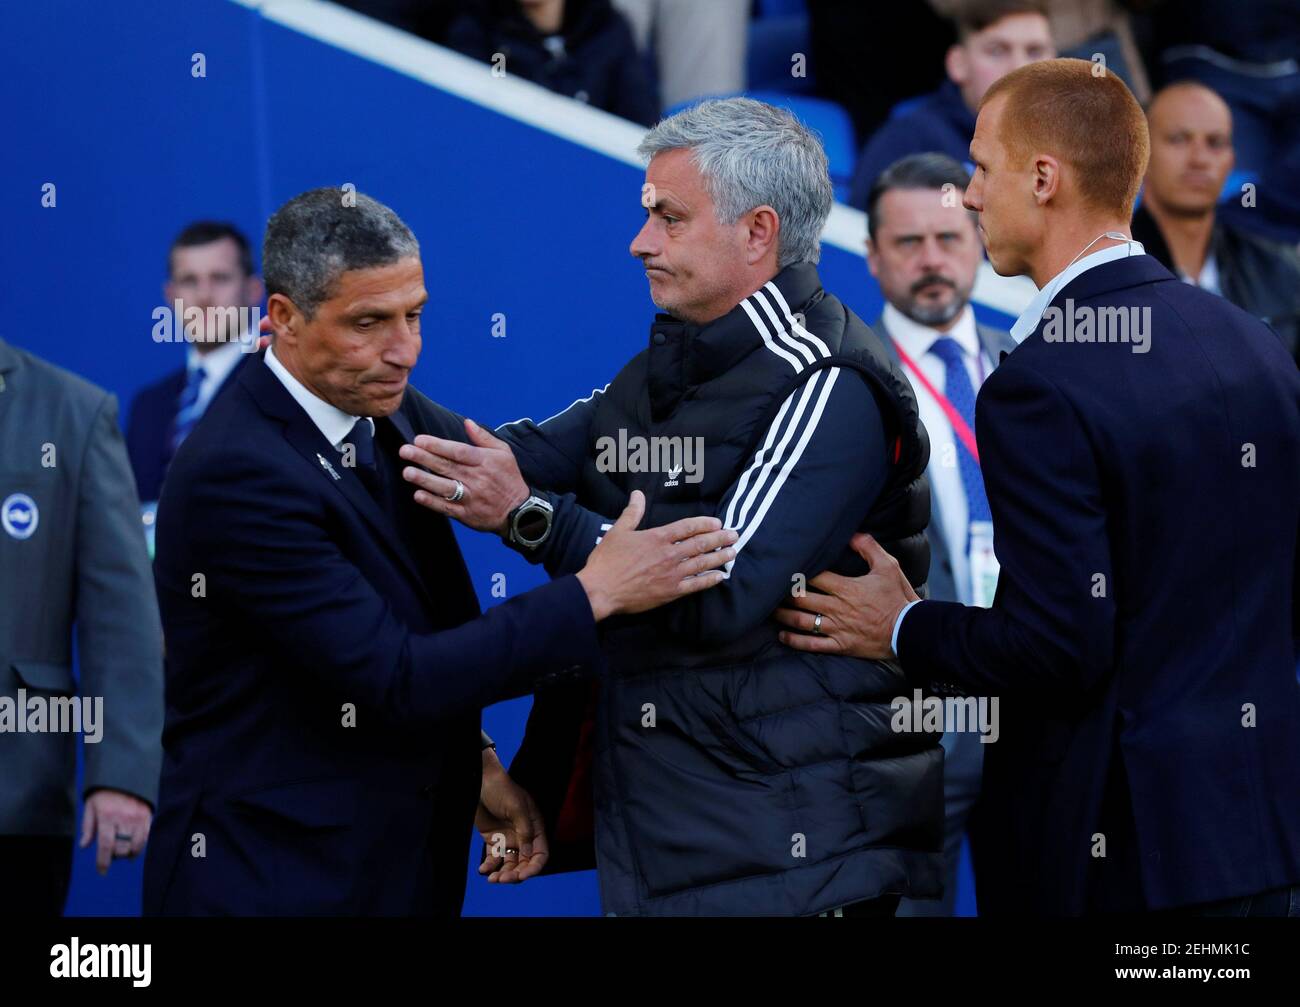 Soccer Football - Premier League - Brighton & Hove Albion v Manchester United - The American Express Community Stadium, Brighton, Britain - May 4, 2018   Manchester United manager Jose Mourinho and Brighton manager Chris Hughton before the match as Steve Sidwell looks on   REUTERS/Eddie Keogh    EDITORIAL USE ONLY. No use with unauthorized audio, video, data, fixture lists, club/league logos or 'live' services. Online in-match use limited to 75 images, no video emulation. No use in betting, games or single club/league/player publications.  Please contact your account representative for further Stock Photo